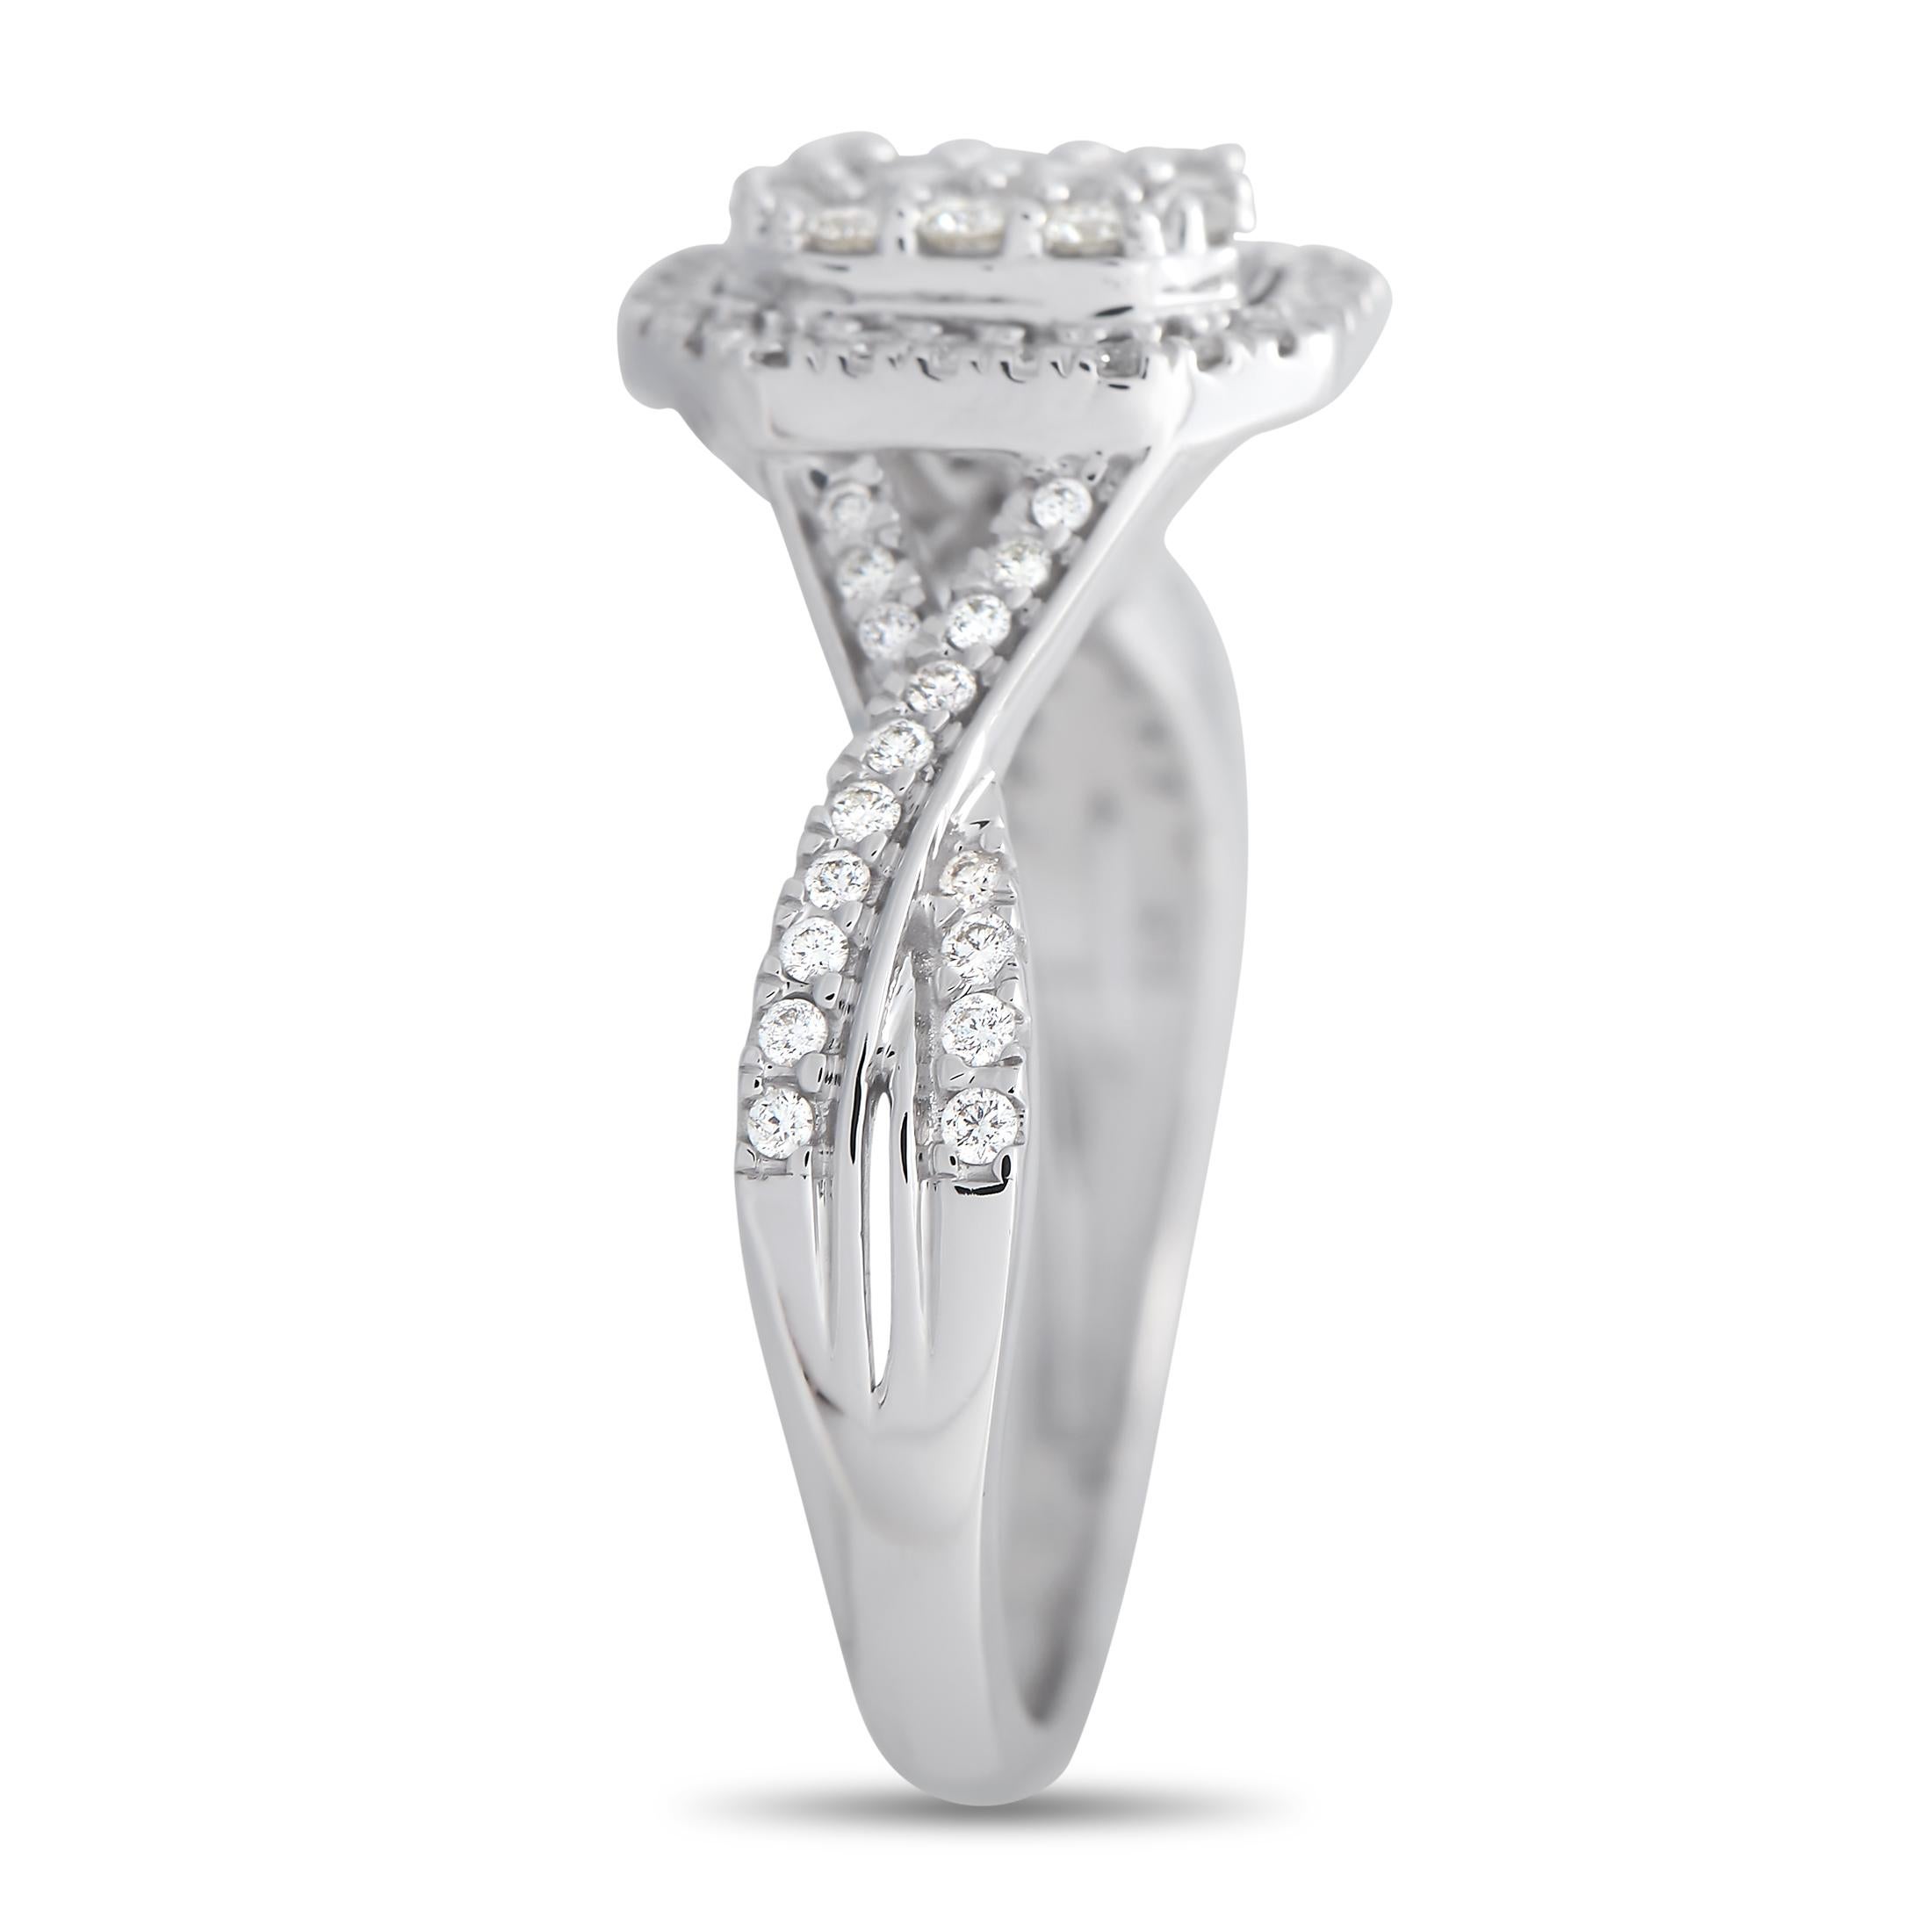 This is a ring of pure elegance. It features a diamond-traced twisted shank topped with a mesmerizing diamond cluster centerpiece. The sparkling group of diamonds is further framed by an octagonal halo of smaller diamonds. The band measures 3mm